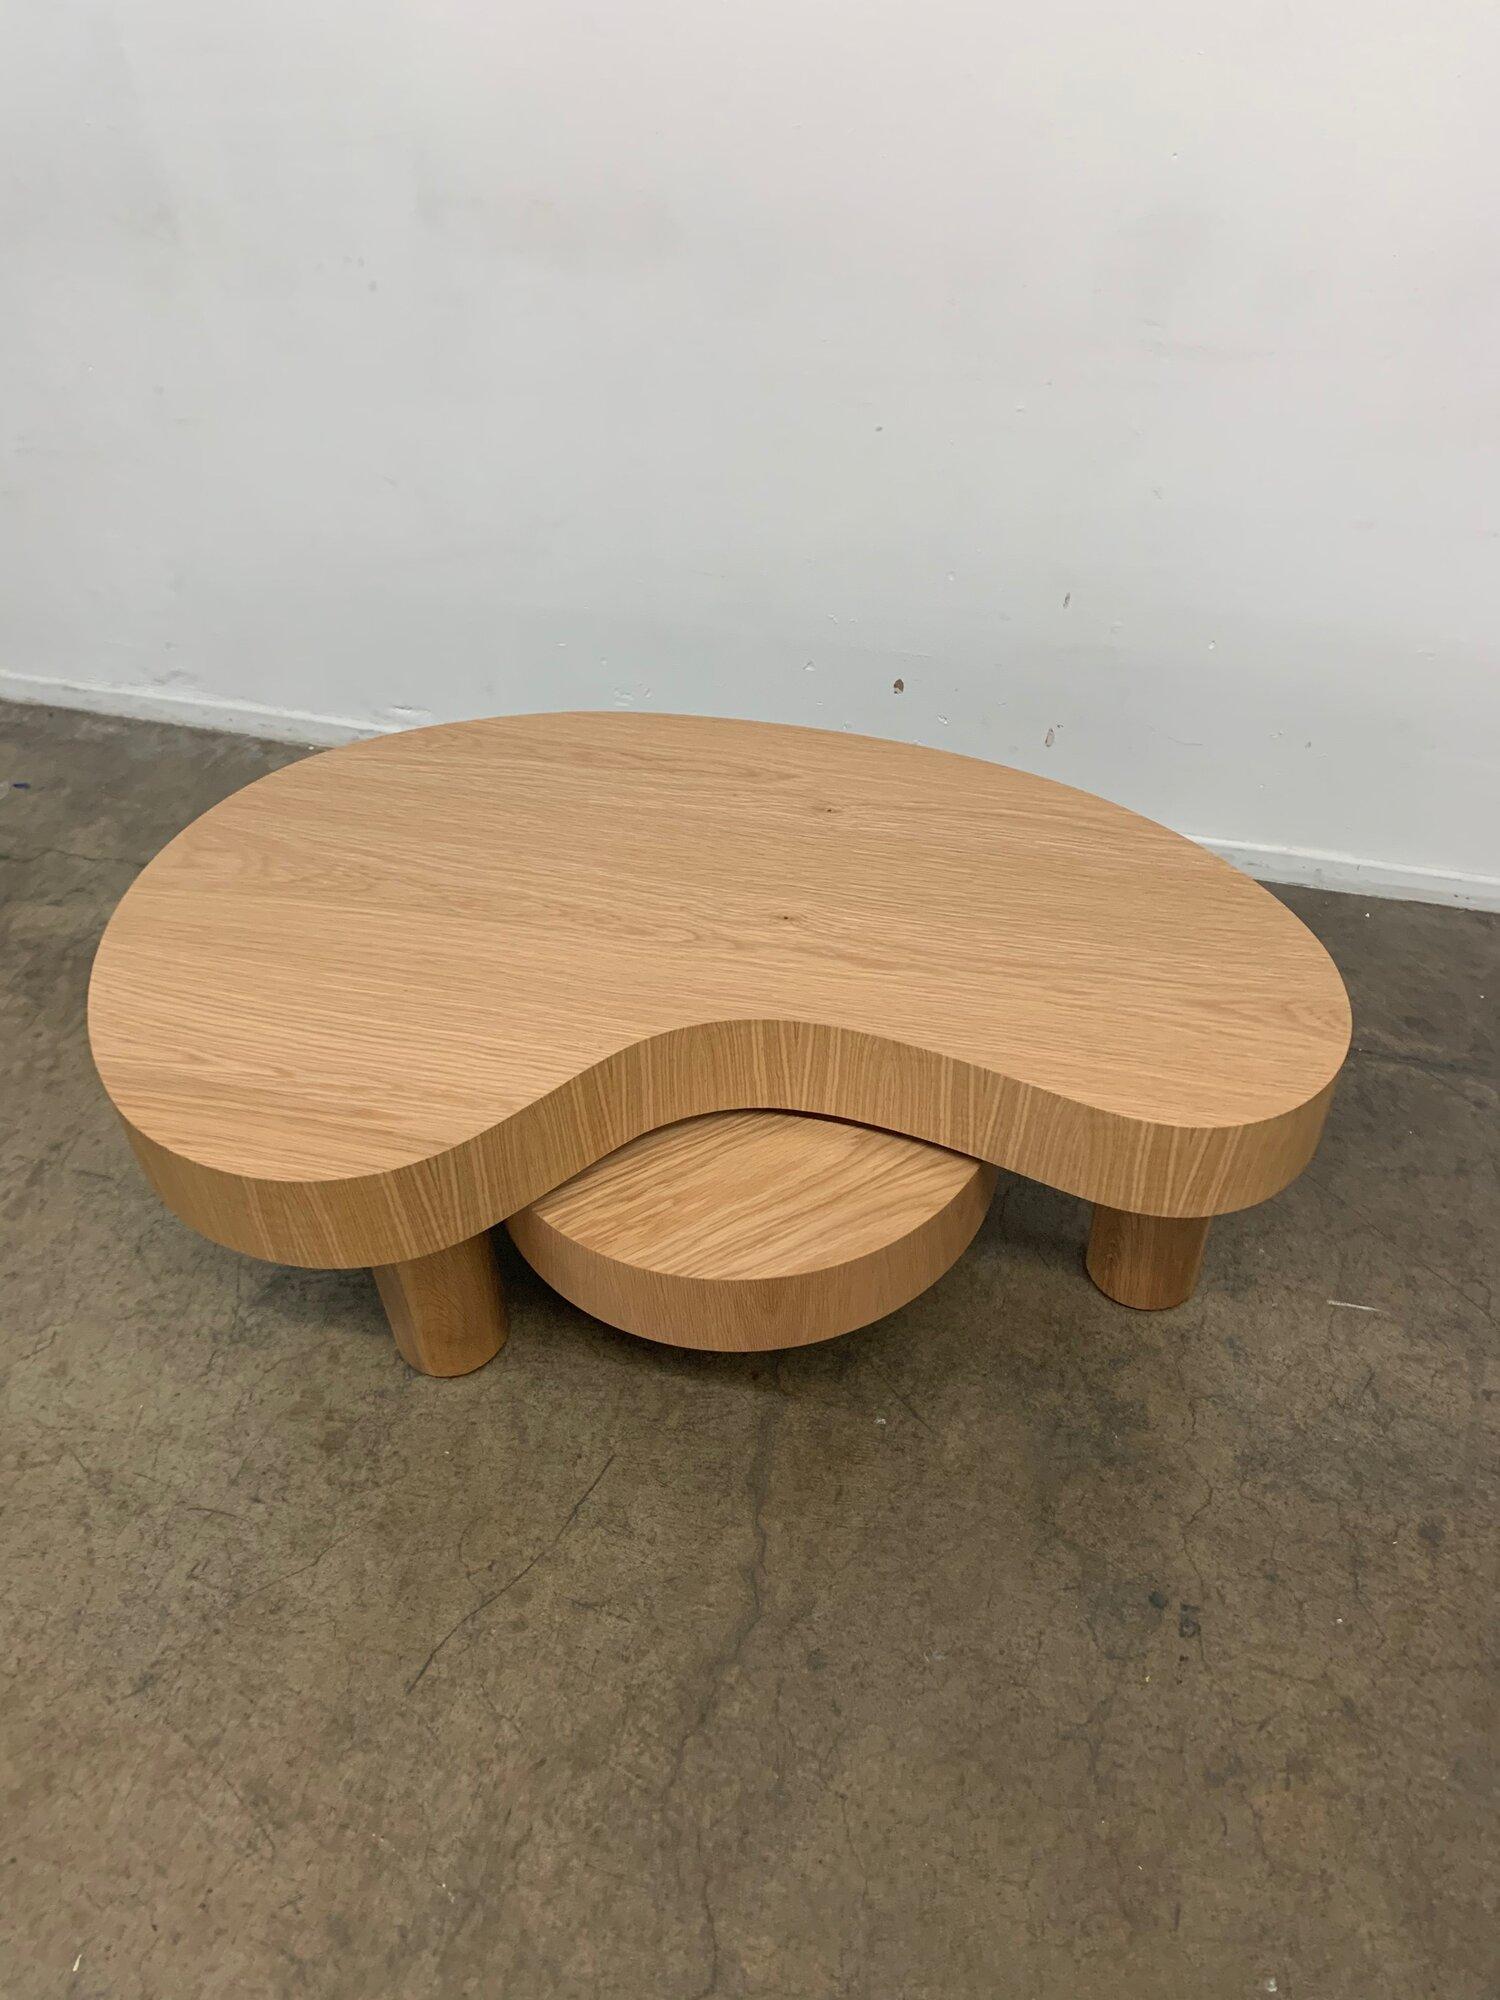 Medium version offered. 
Measures: Stool W 21.75 D 21.75 H 11.5
Handcrafted Kidney coffee table made in house by Vintage On Point. Made in solid wood framing and veneered wrapped white oak. Small side table can be pushed underneath larger table or